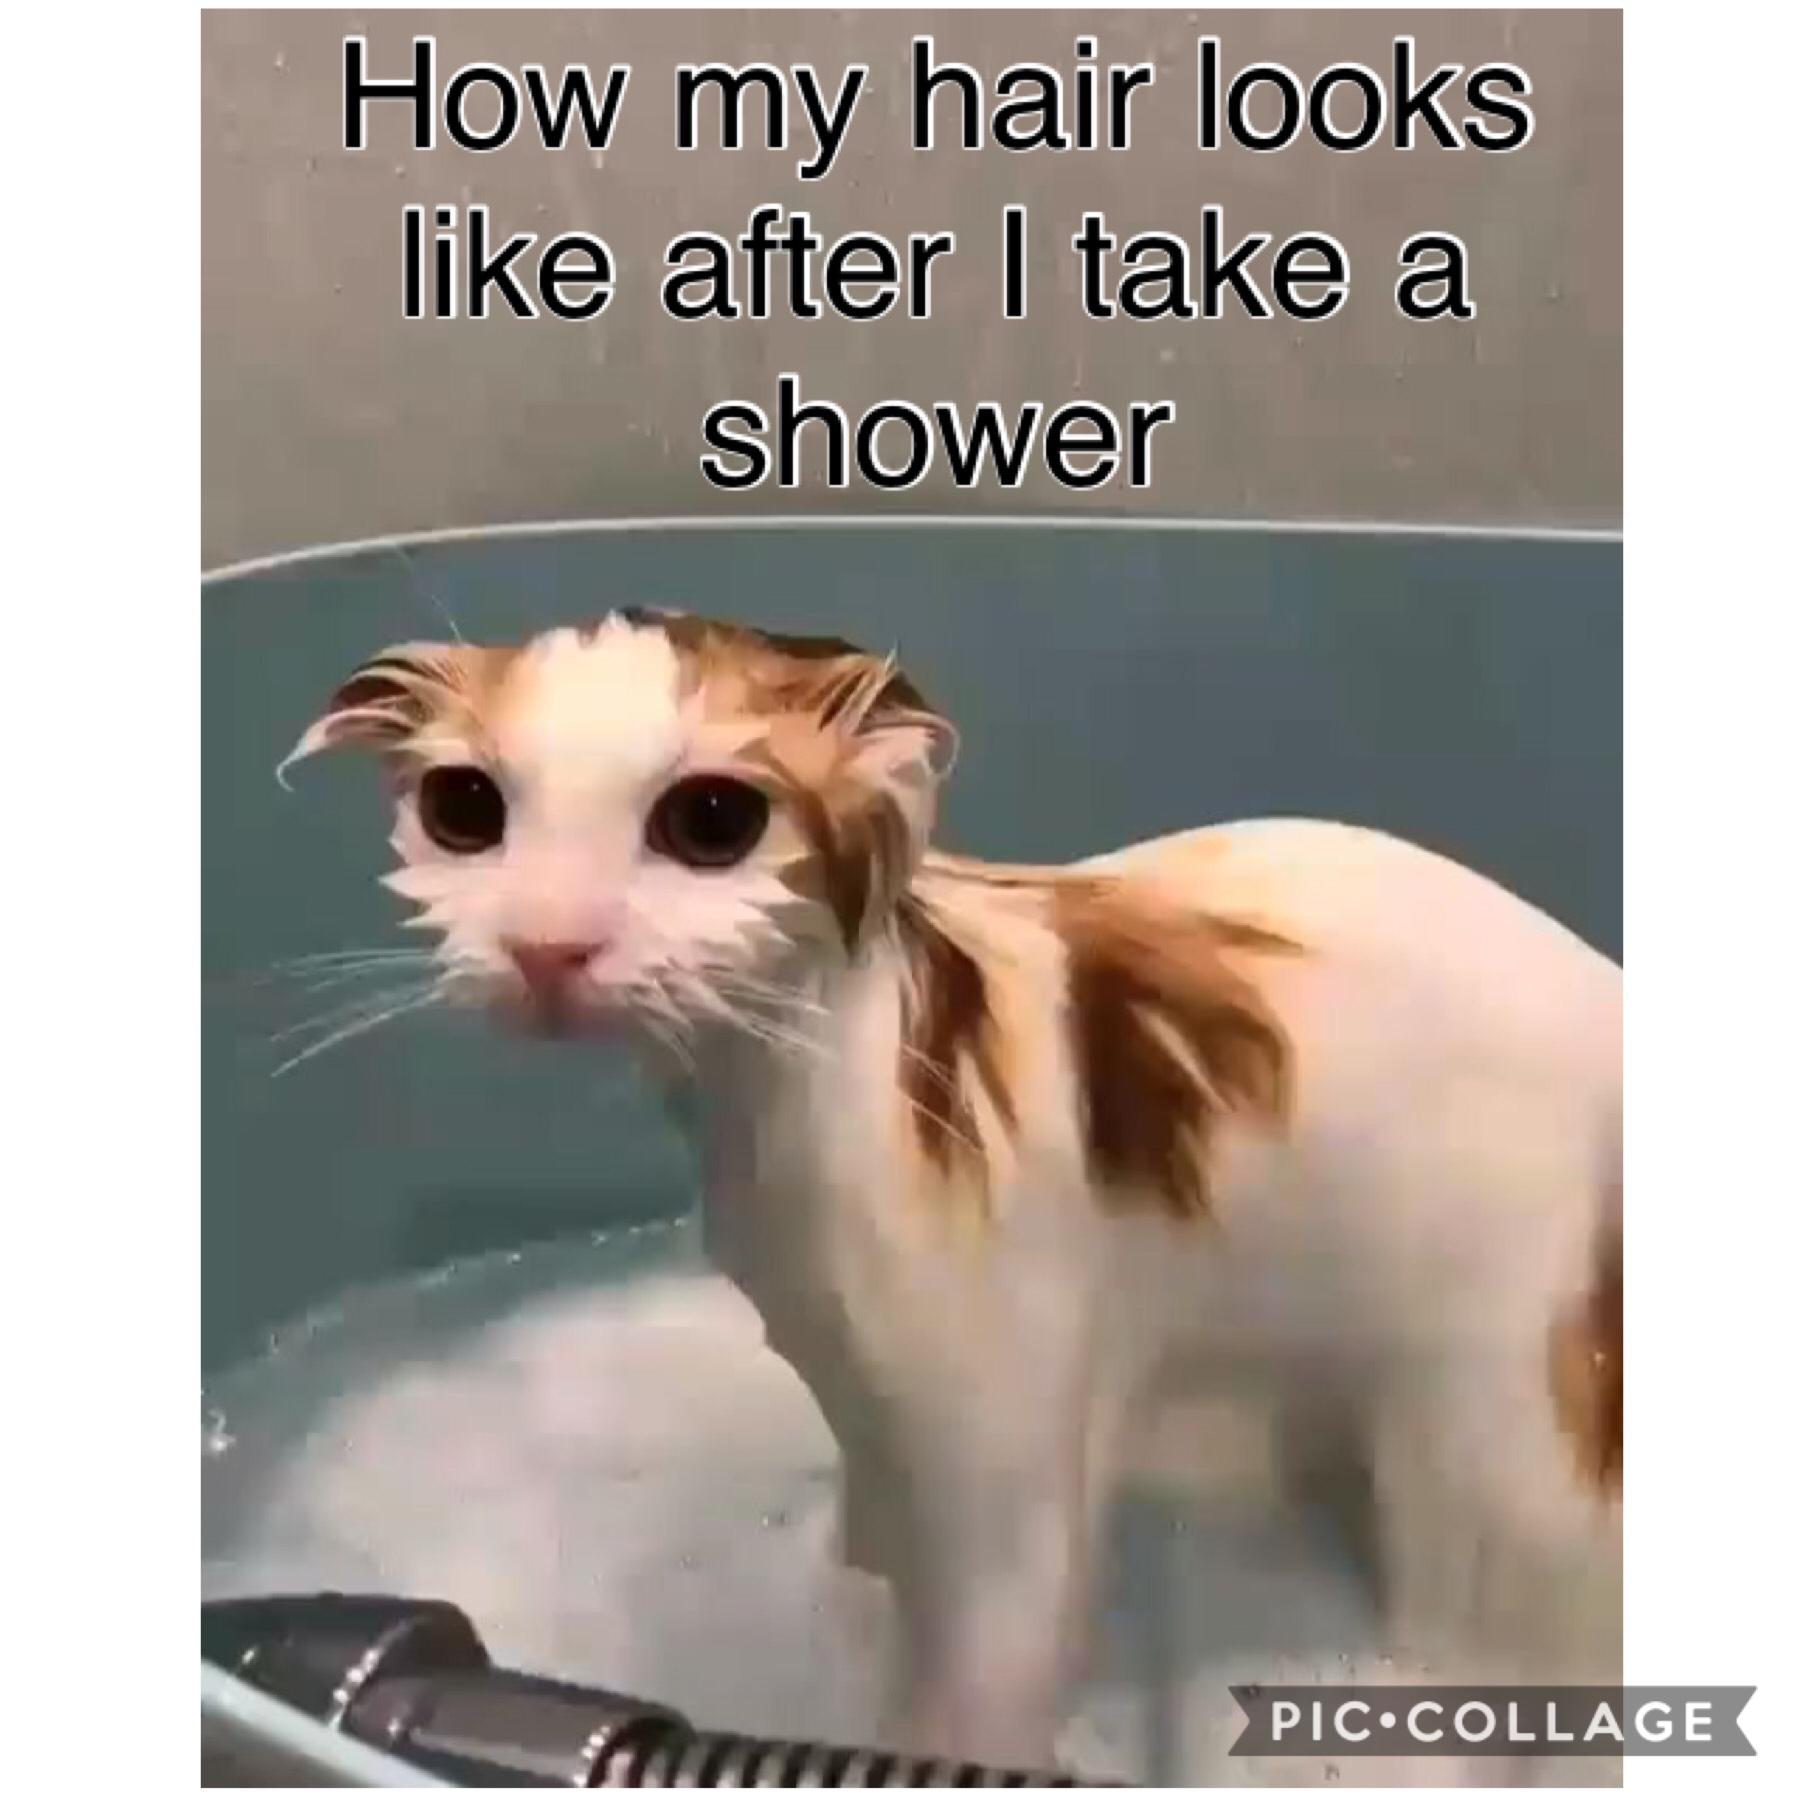 How my hair looks like after a shower